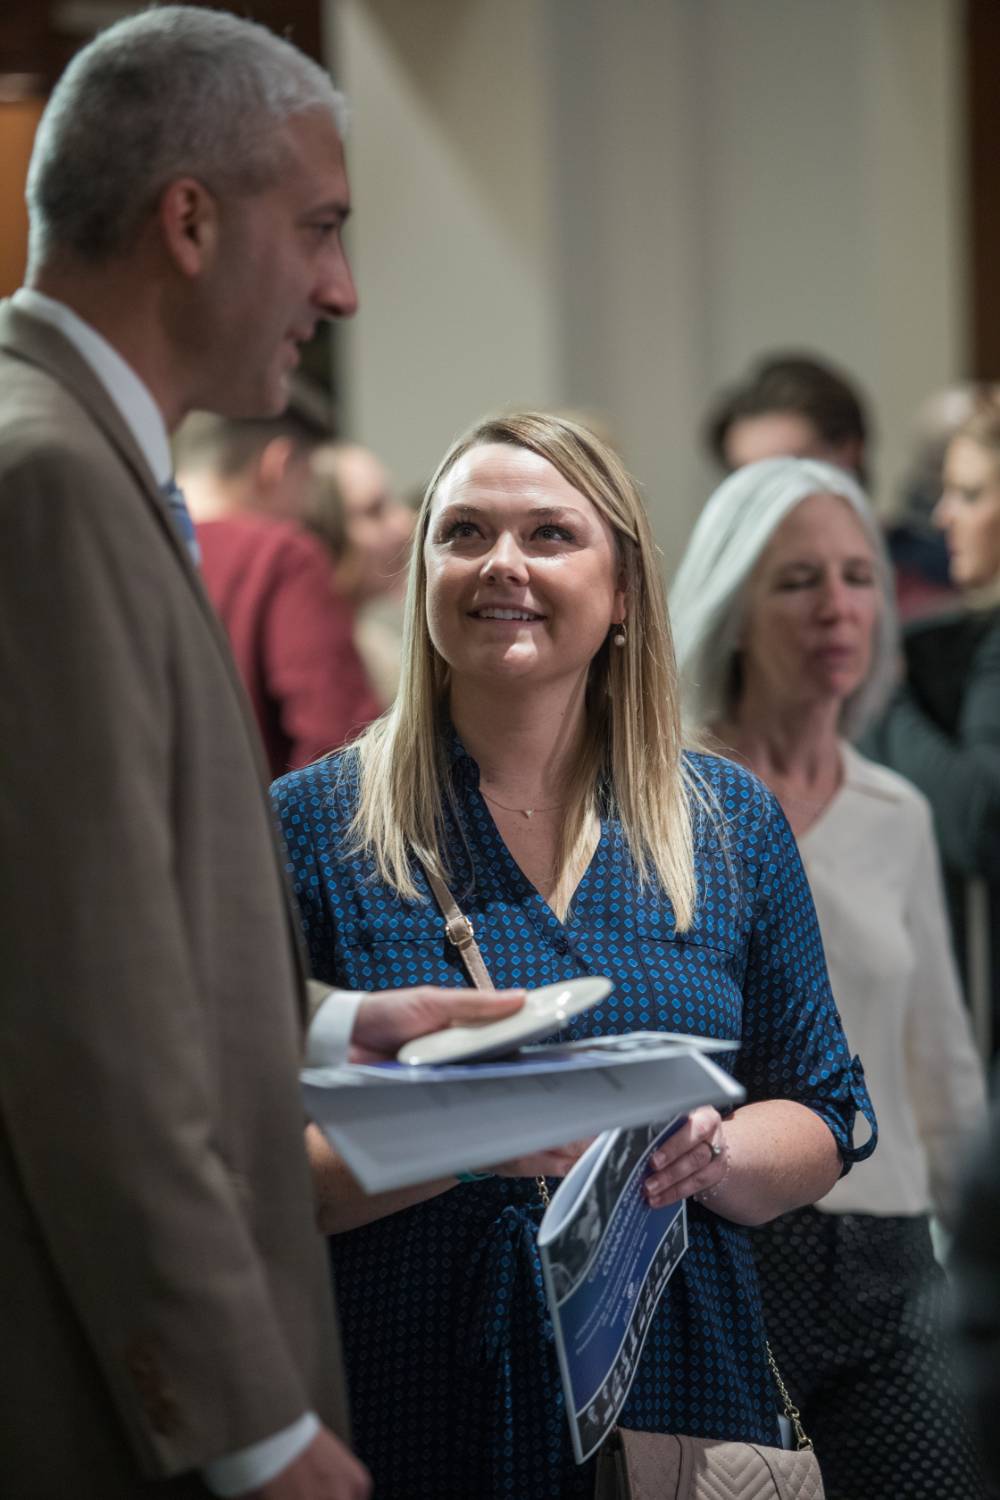 Woman smiling and listening to a man. Both have Fall 2019 Graduate Student Celebration programs in their hands